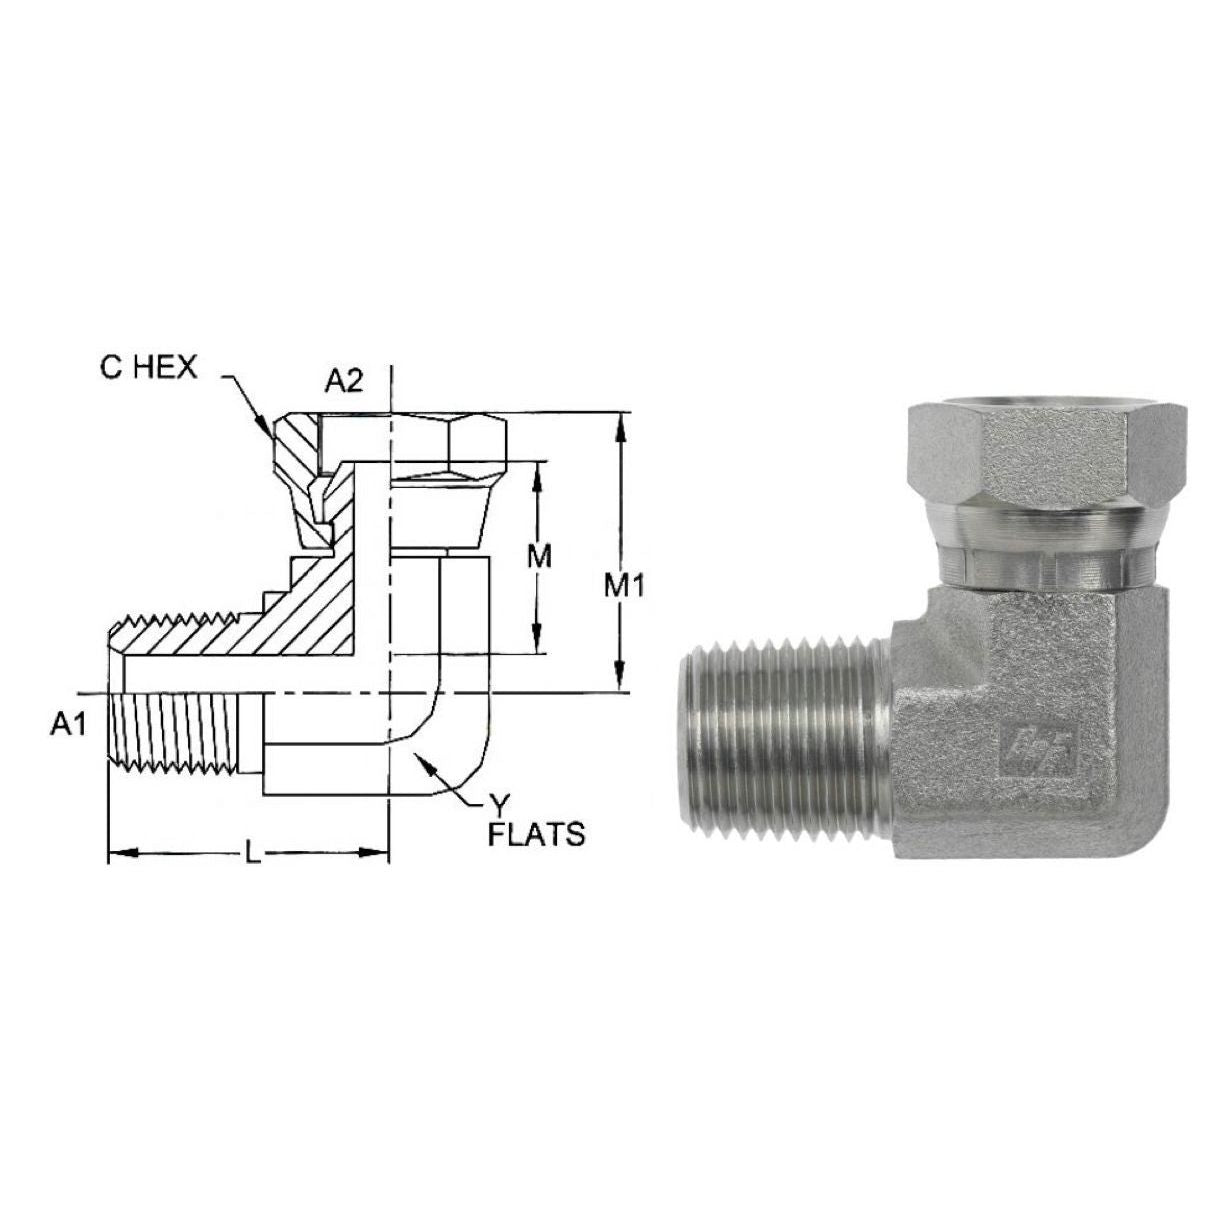 1501-12-12-SS : OneHydraulics 90-Degree Elbow, 0.75 (3/4) Male NPT x 0.75 (3/4) Female NPT Swivel, Stainless Steel, 2700psi